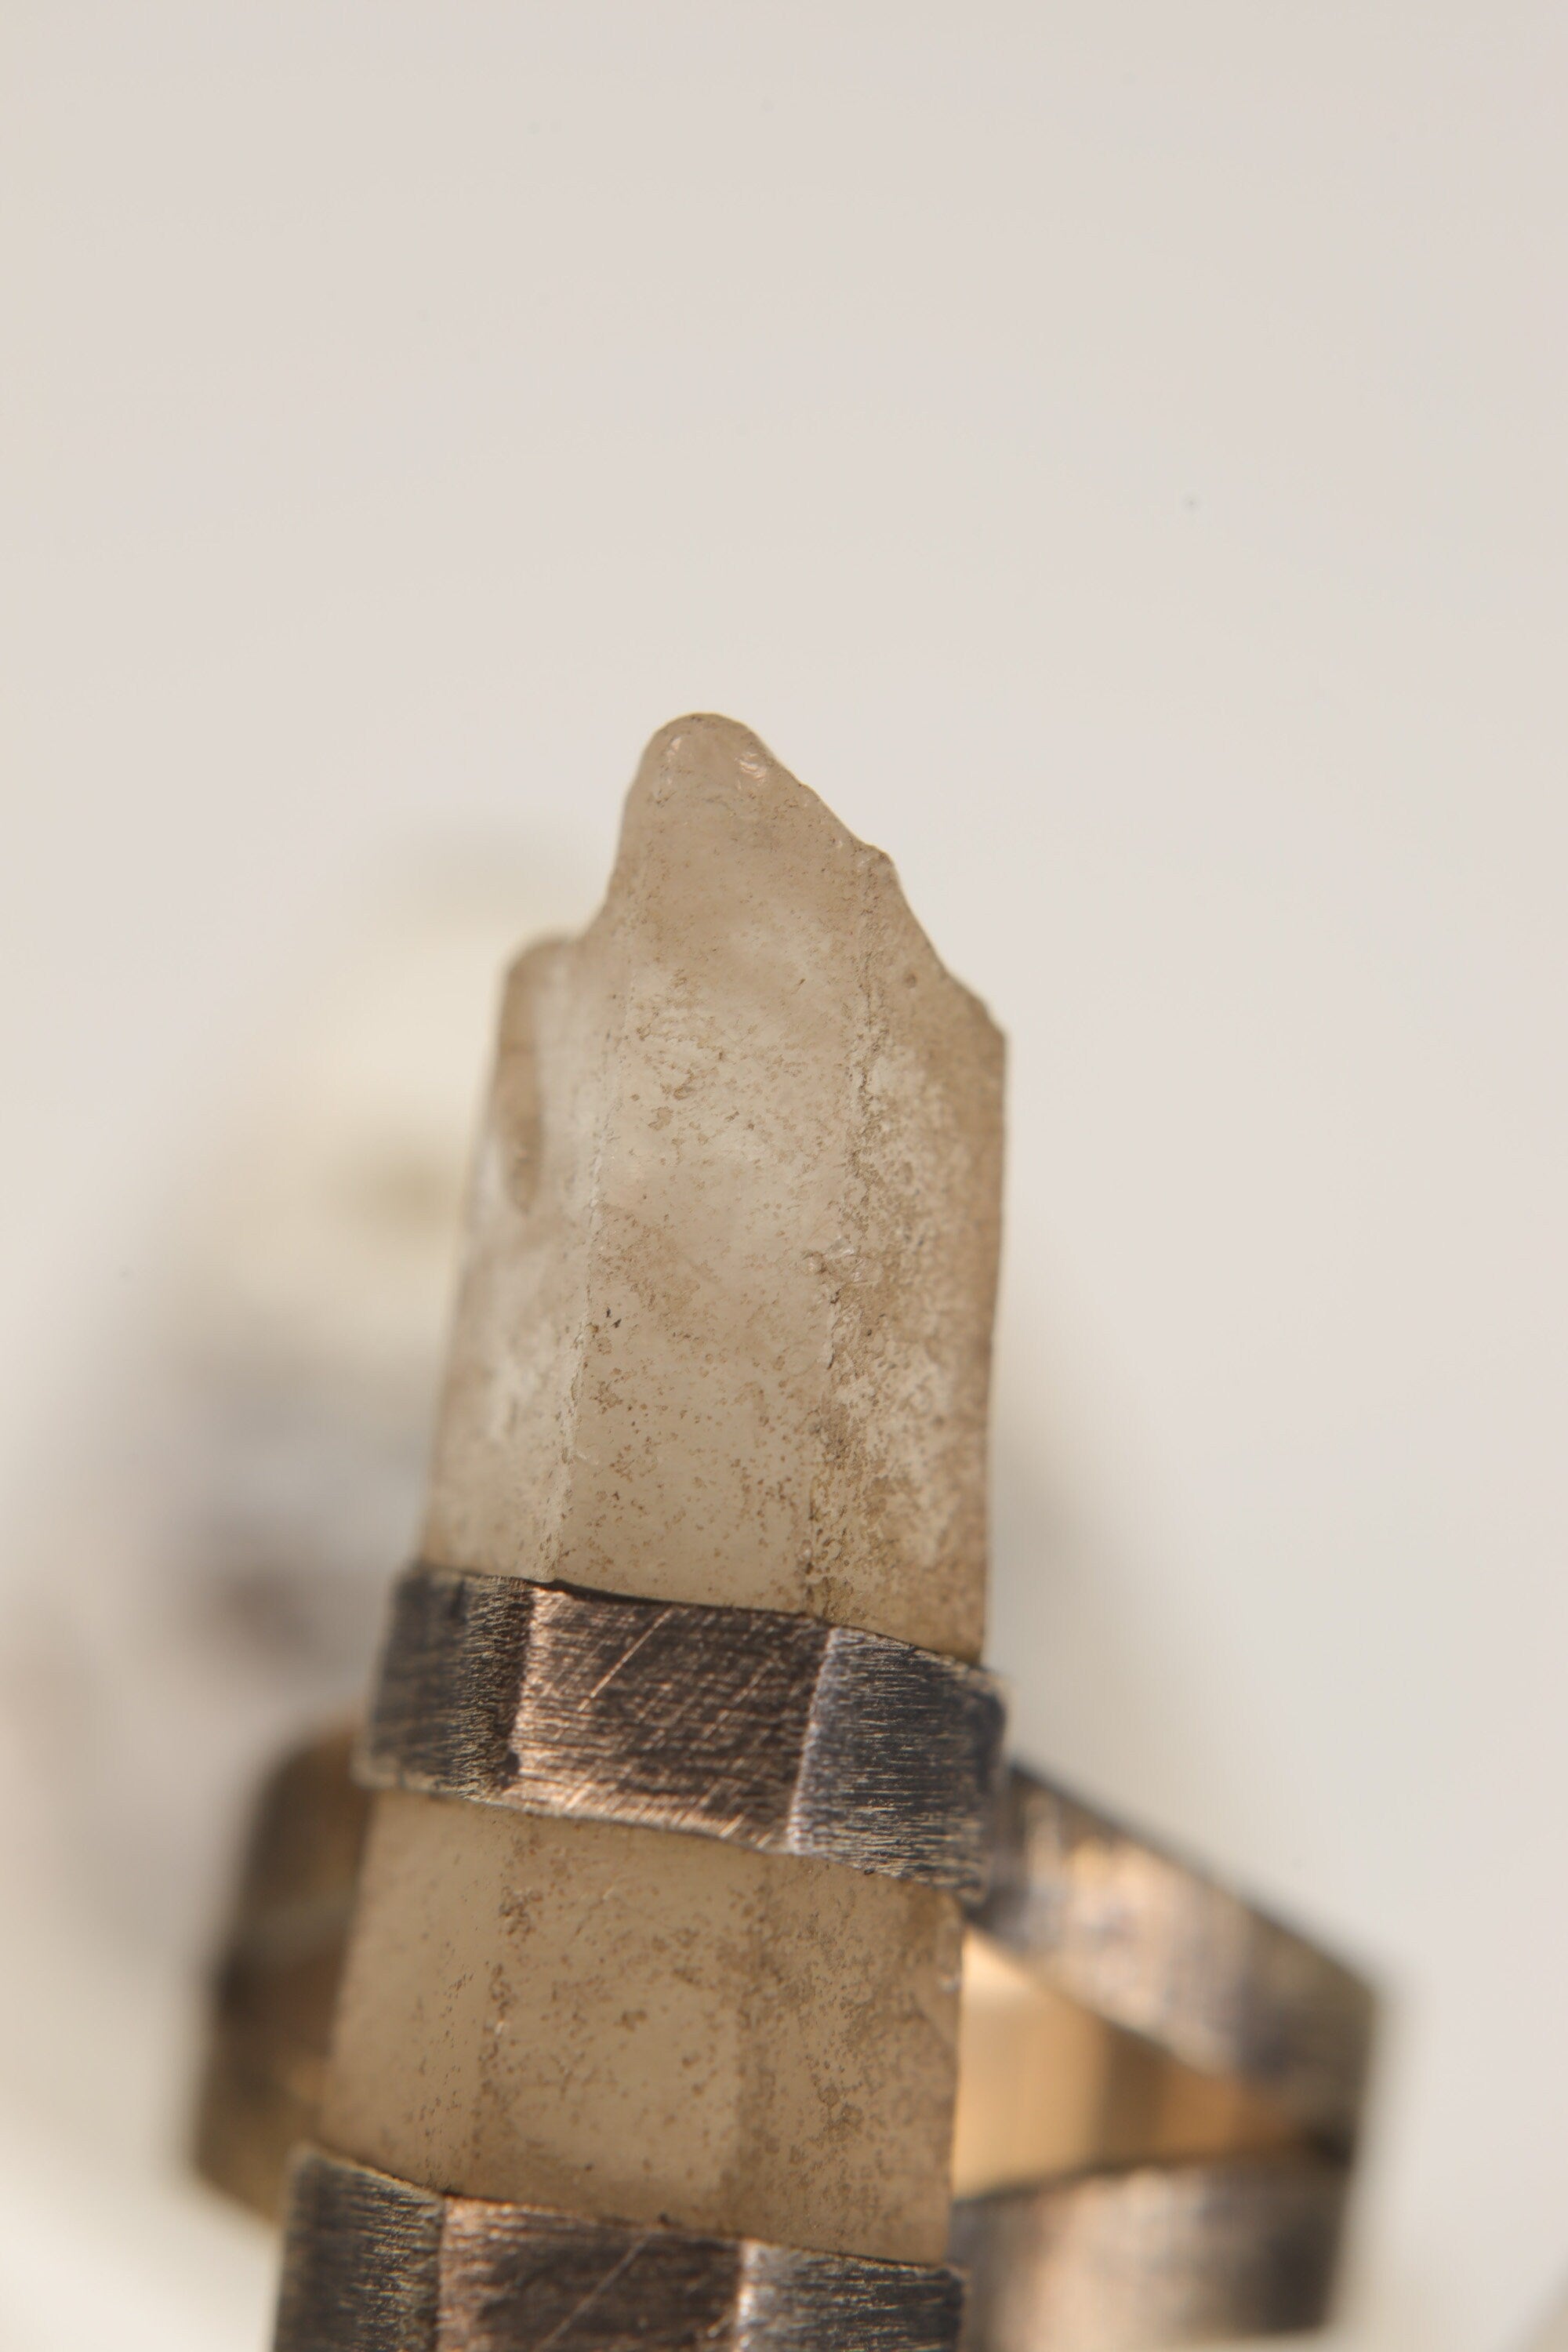 Torrington Radiance: Textured & Oxidised Sterling Silver Ring with Raw Australian Smoky Citrine - Size 6 3/4 - NO/04